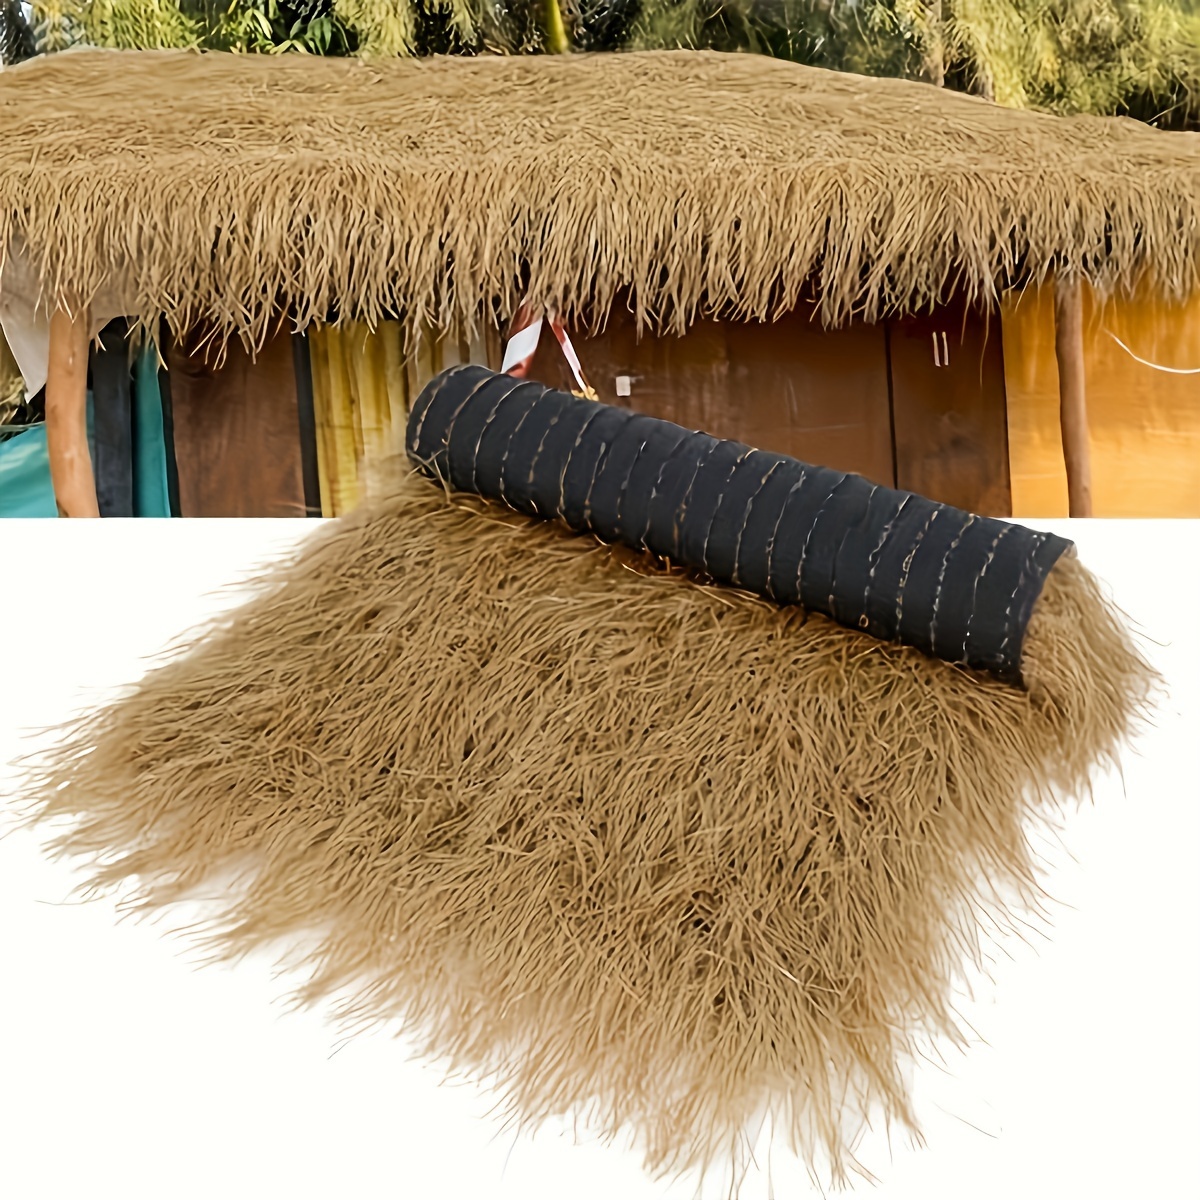 

1pc Artificial Thatch Roof Roll, Faux Thatch Carpet For , Plastic Synthetic Thatching For Bar, Cabana, Gazebo, Tropical Grass Lawn, Outdoor Home Decoration